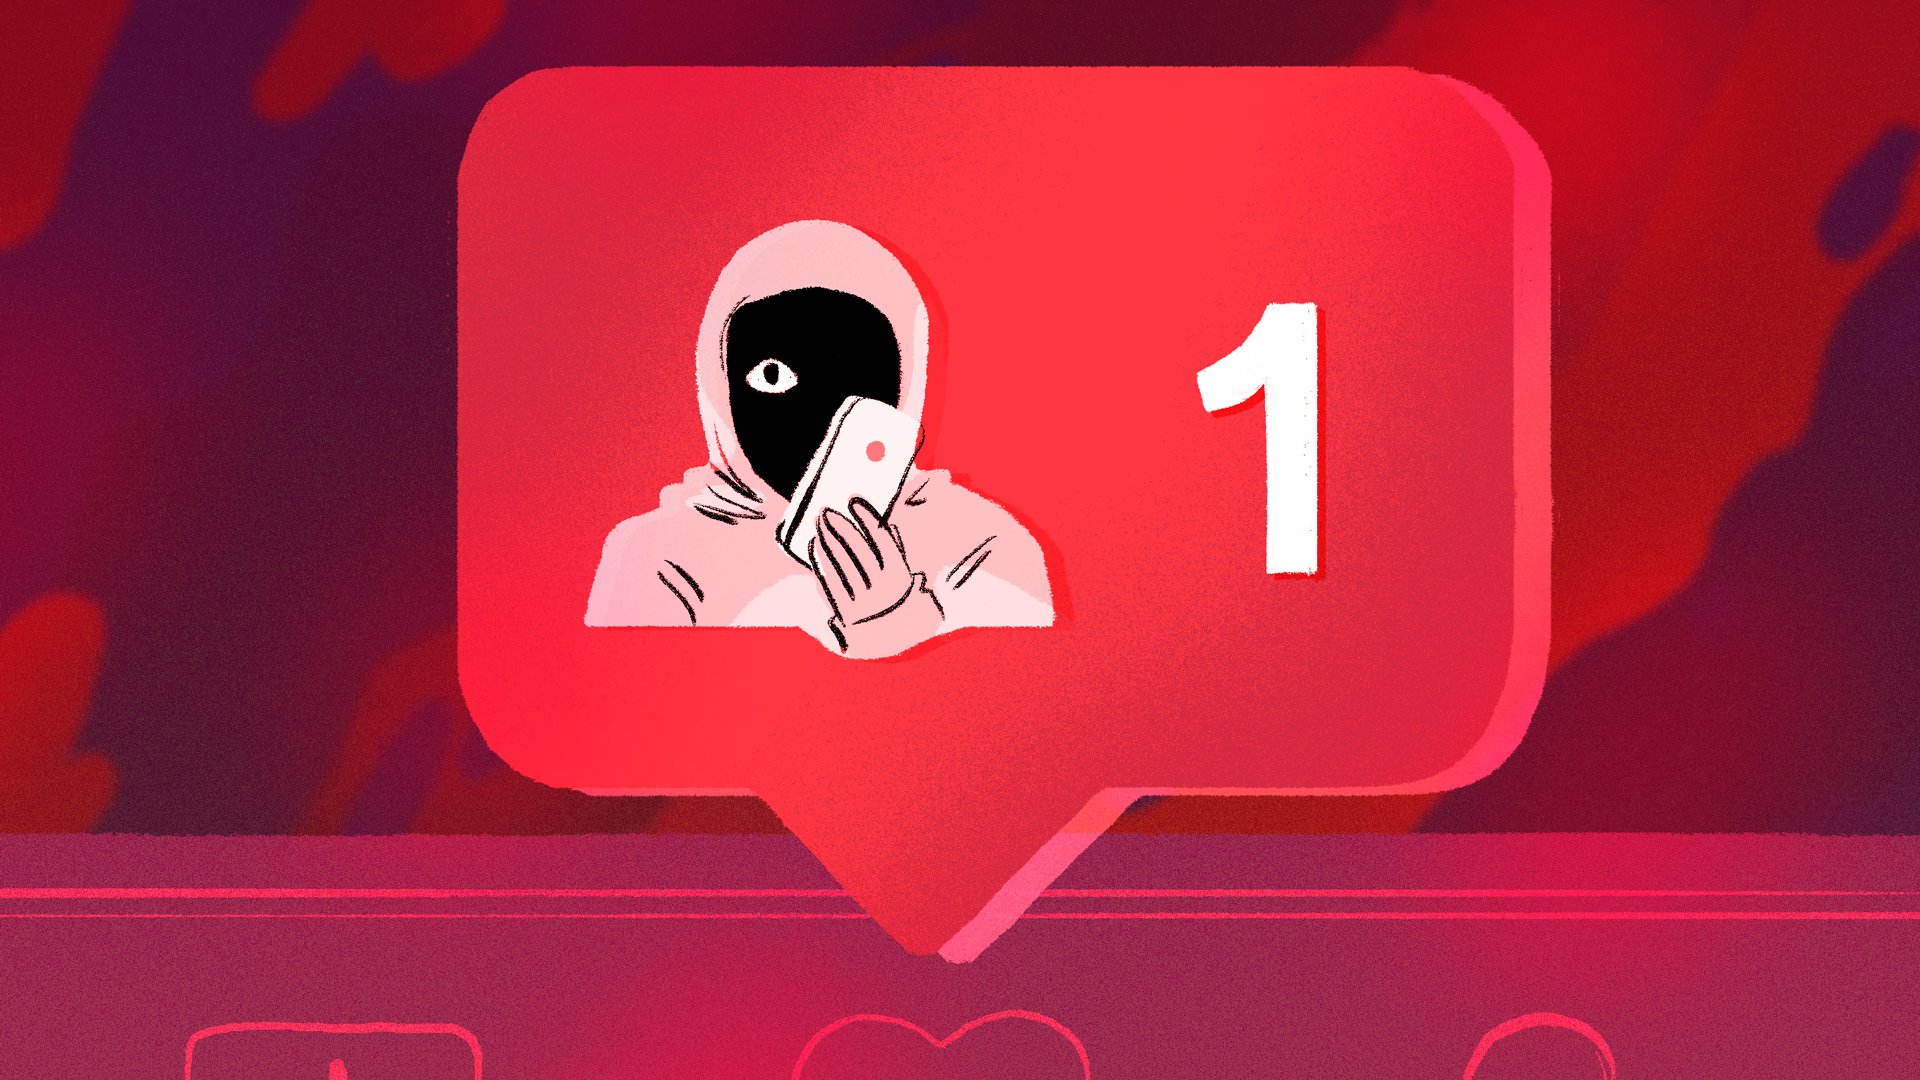 Instagram heart with a hooded, shaded character lurking on a phone